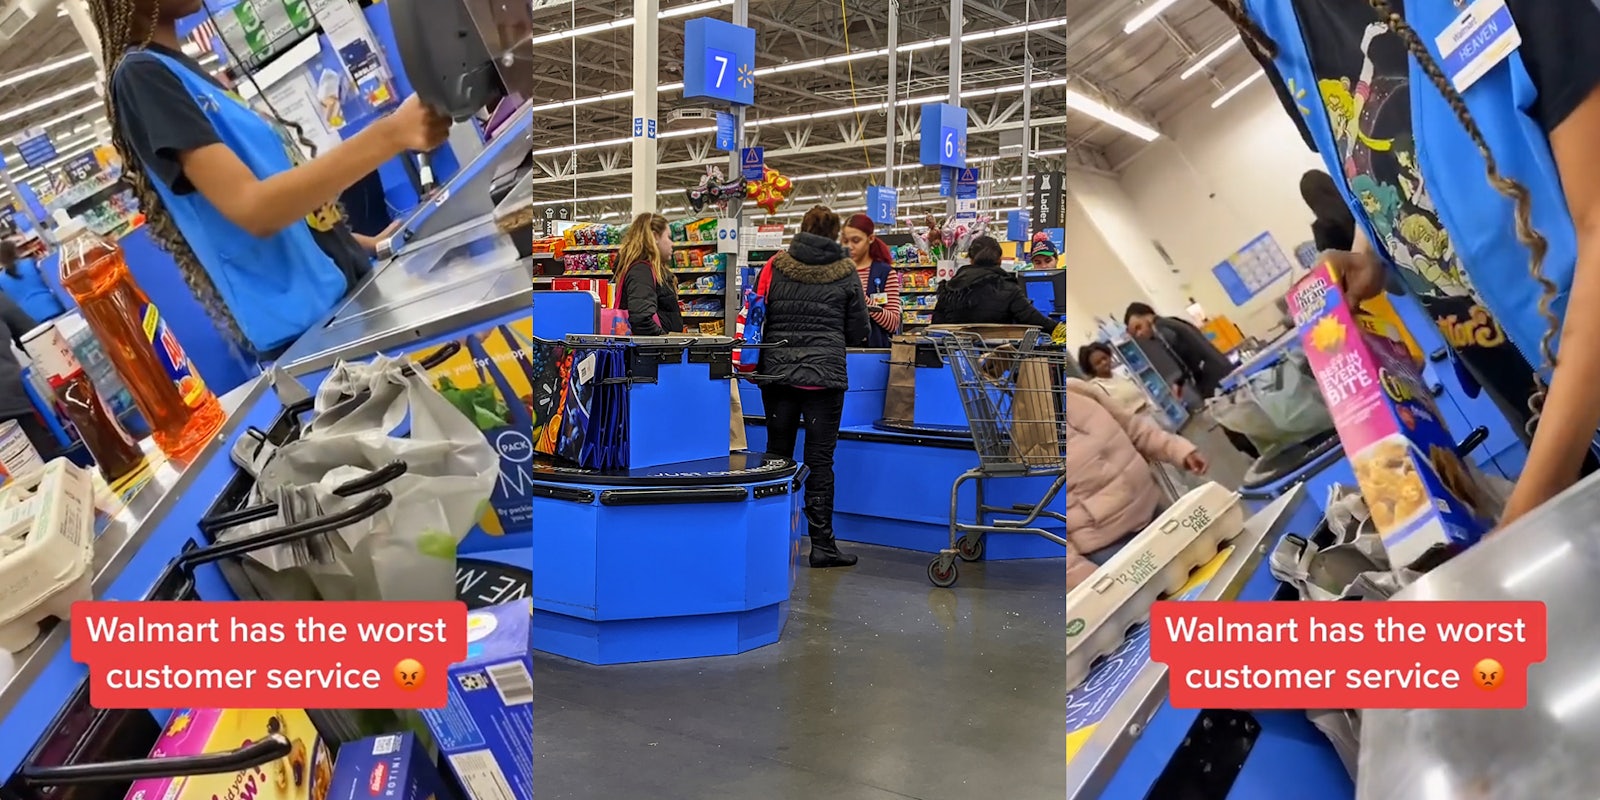 Walmart worker at checkout with caption 'Walmart has the worst customer service' (l) Walmart checkout with customers (c) Walmart worker at checkout with caption 'Walmart has the worst customer service' (r)